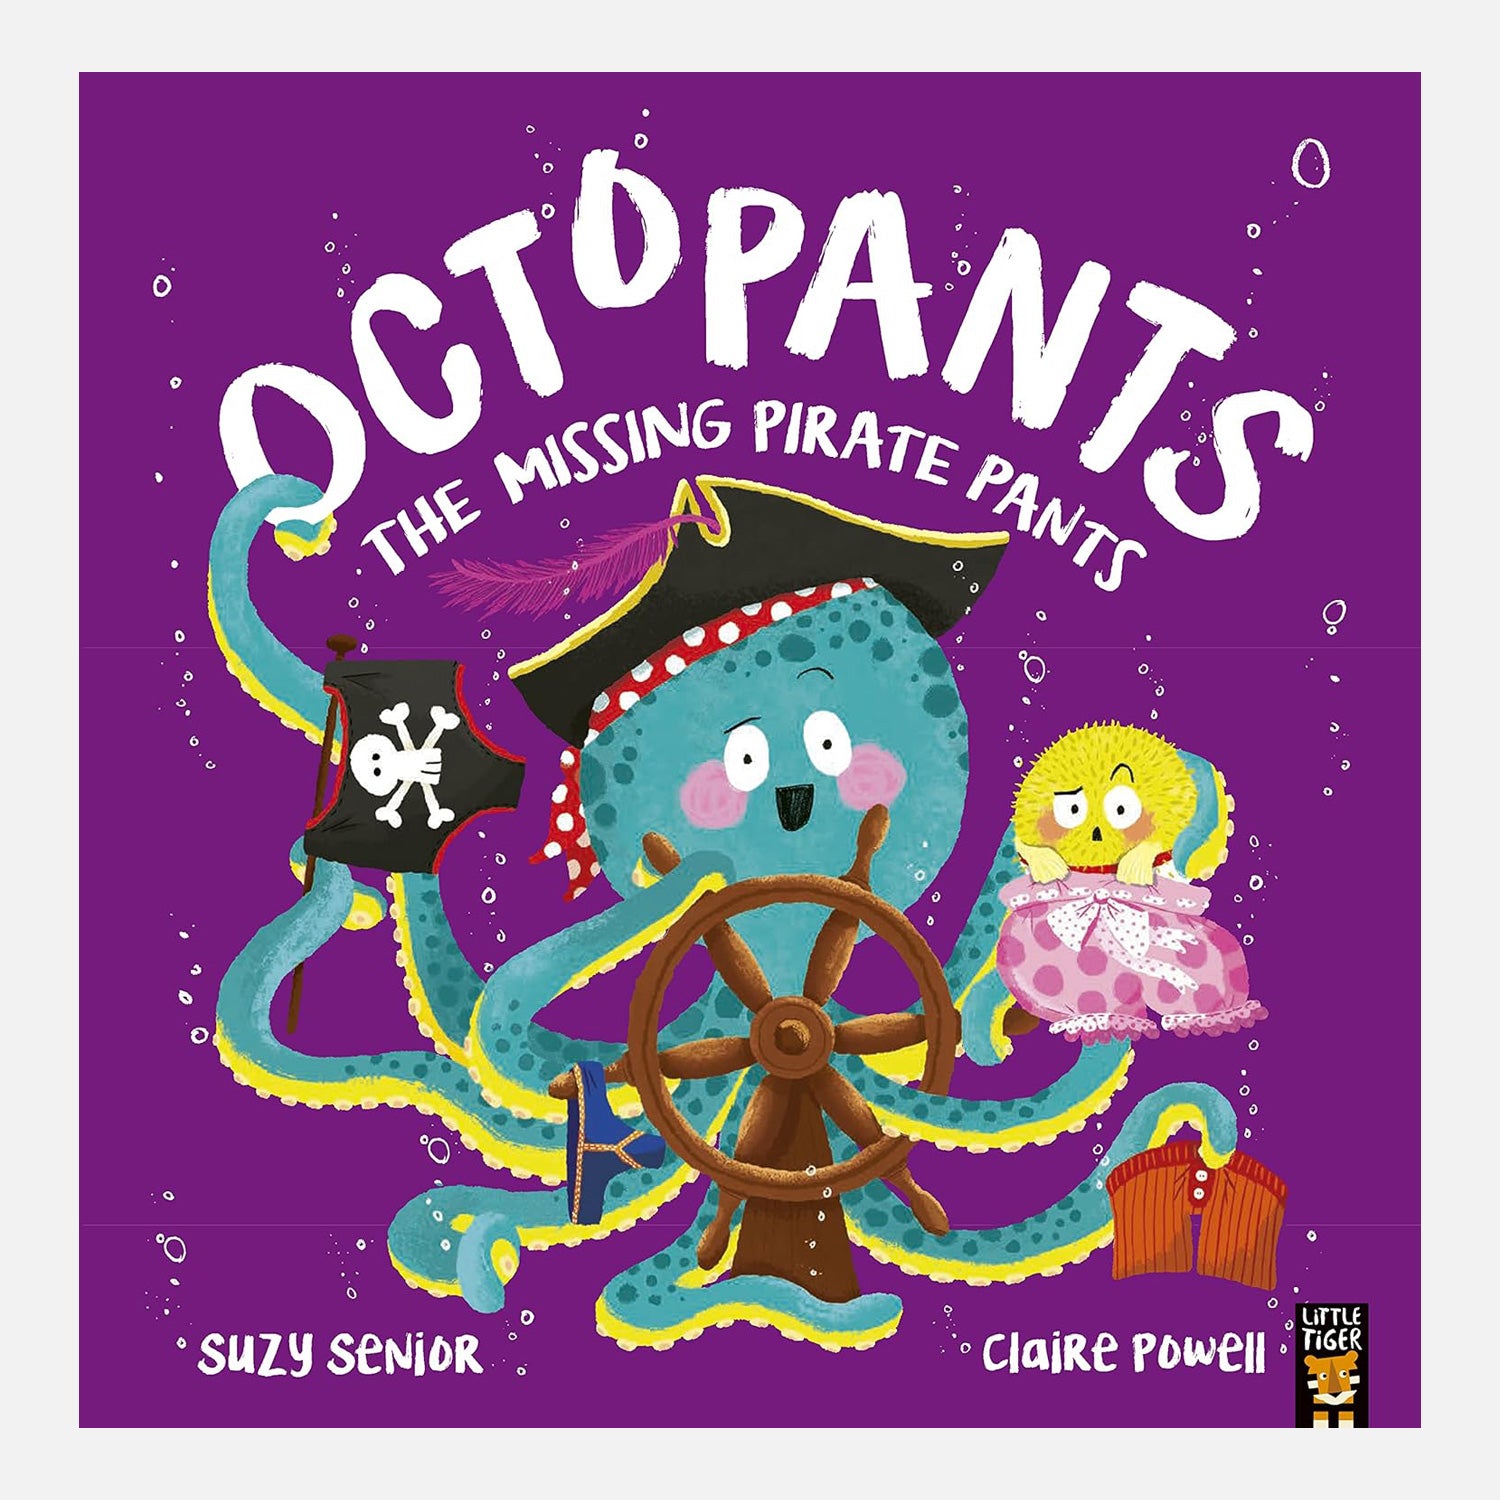 Octopants, the missing pirate pants with pirate octopus with ship steering wheel on a bight purple cover